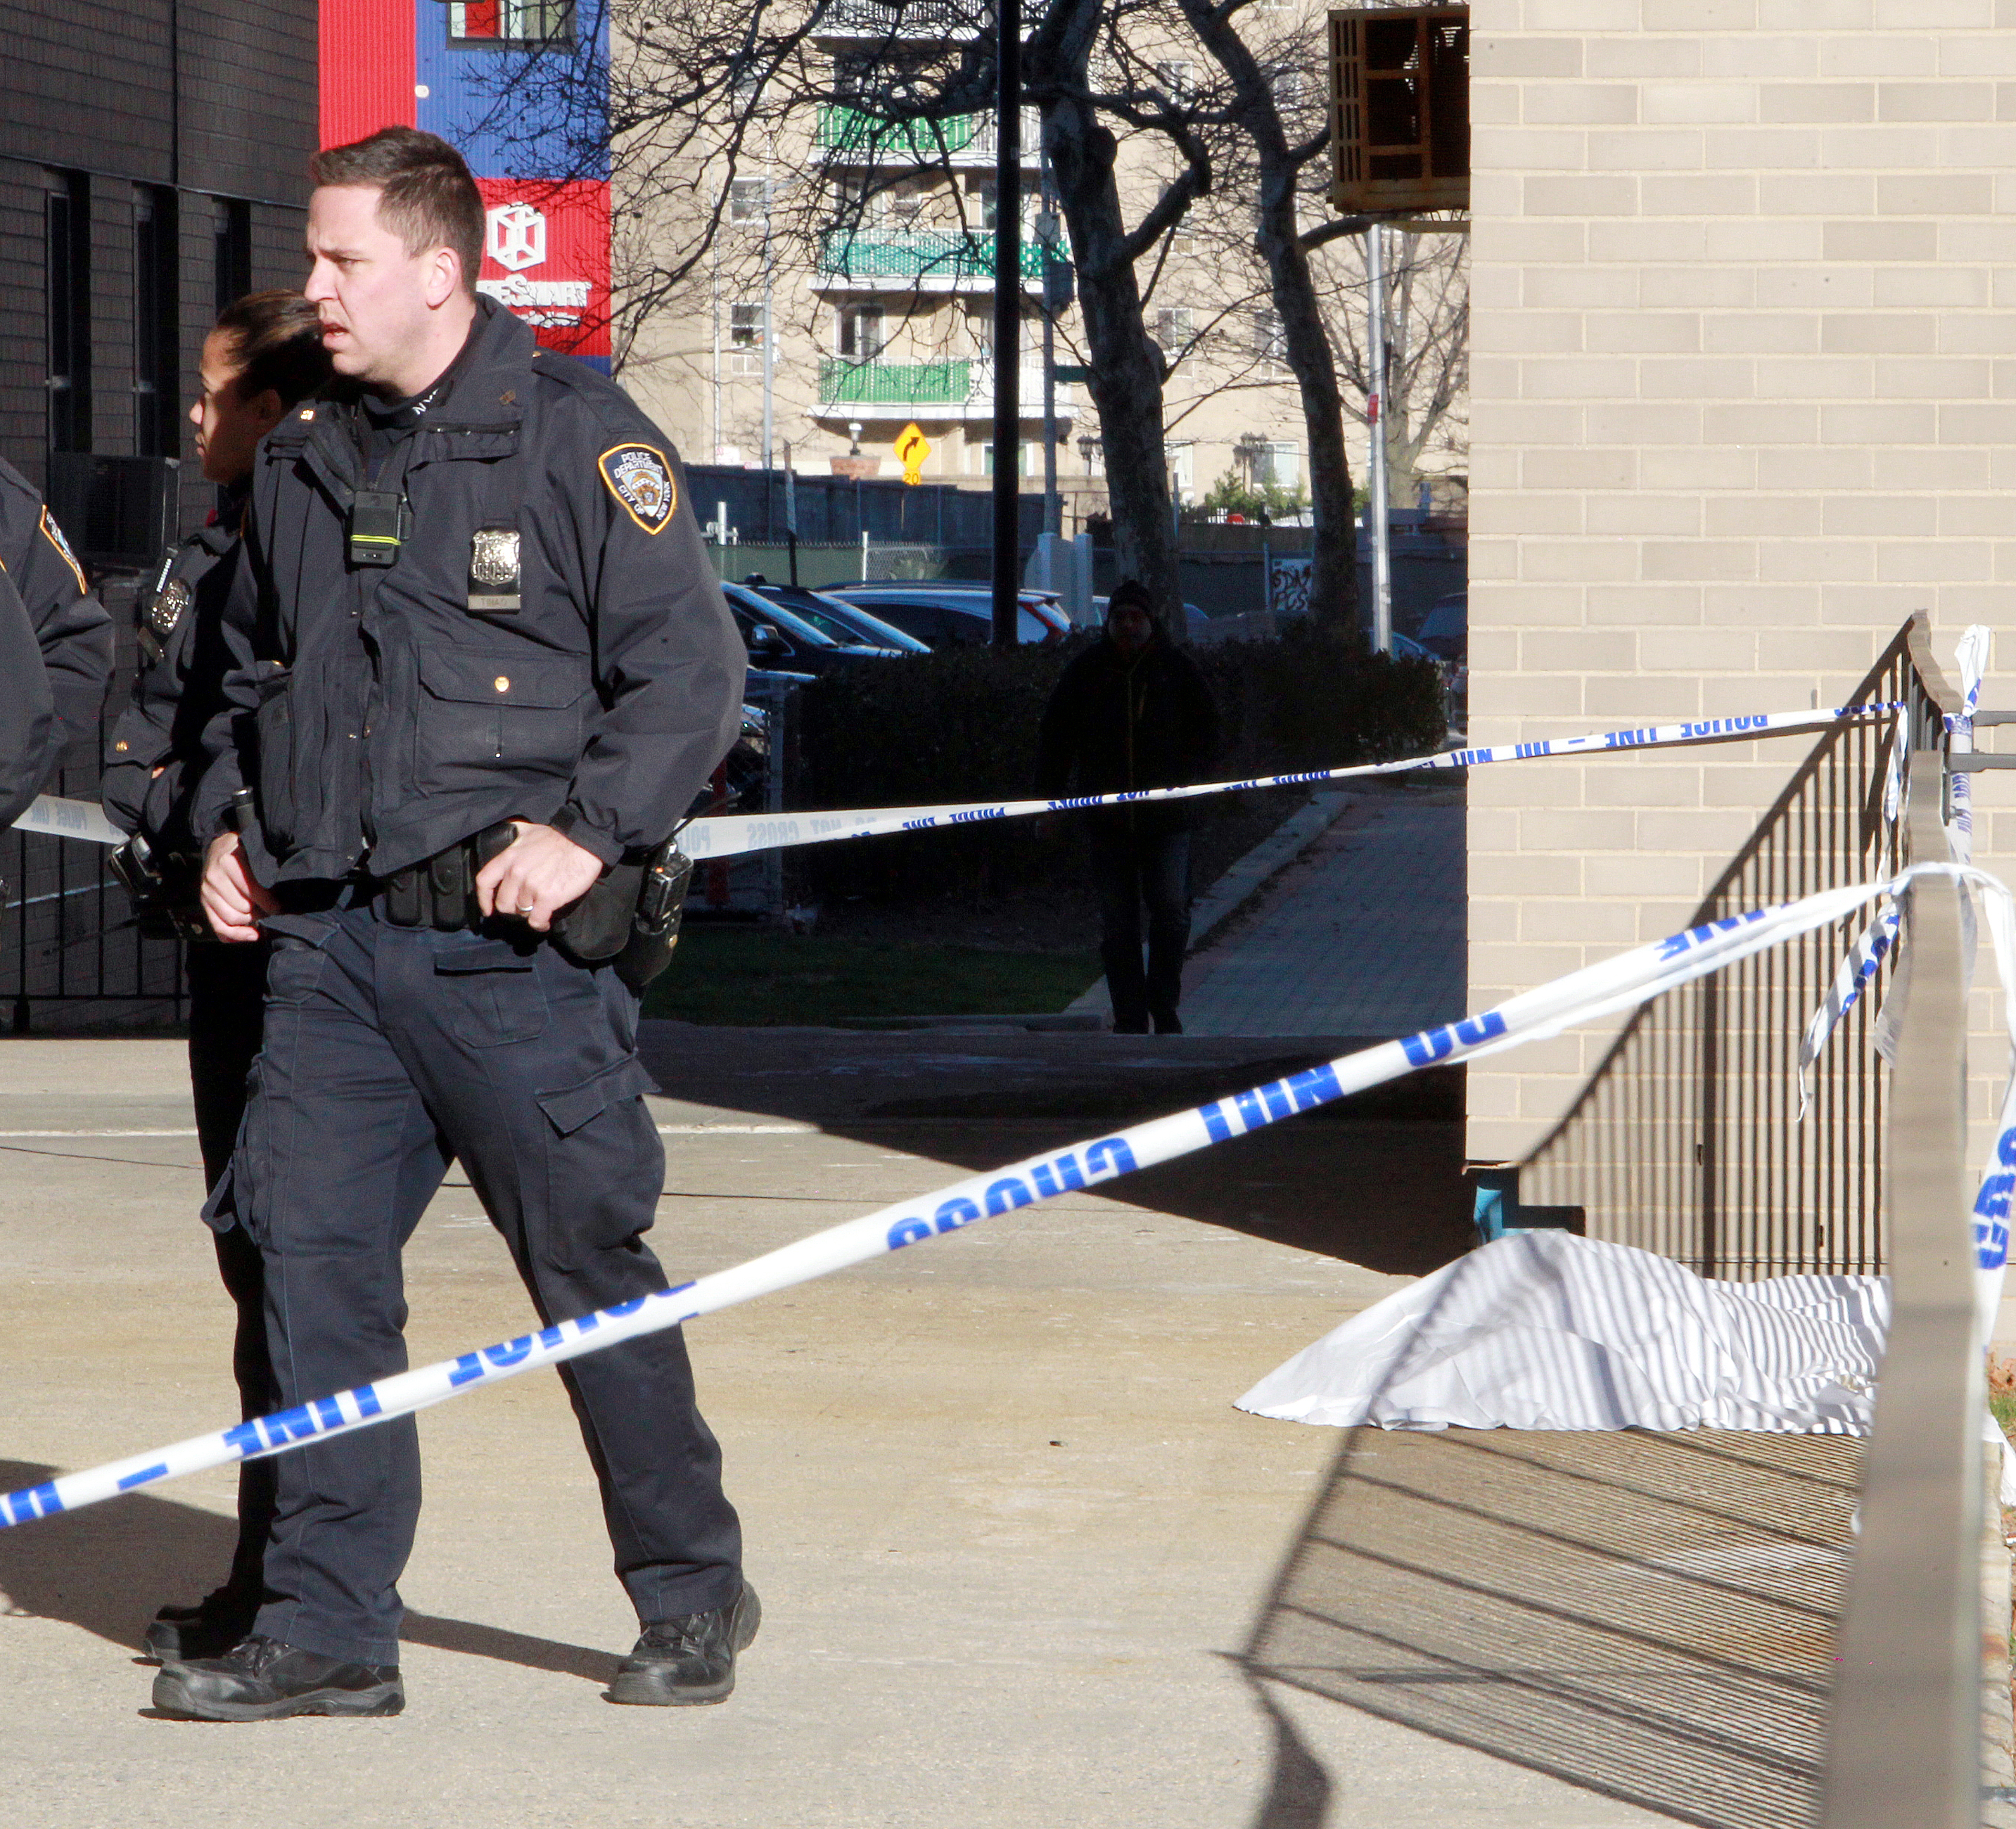 Cops at the scene of the suicide. Photo by Steve Solomonson